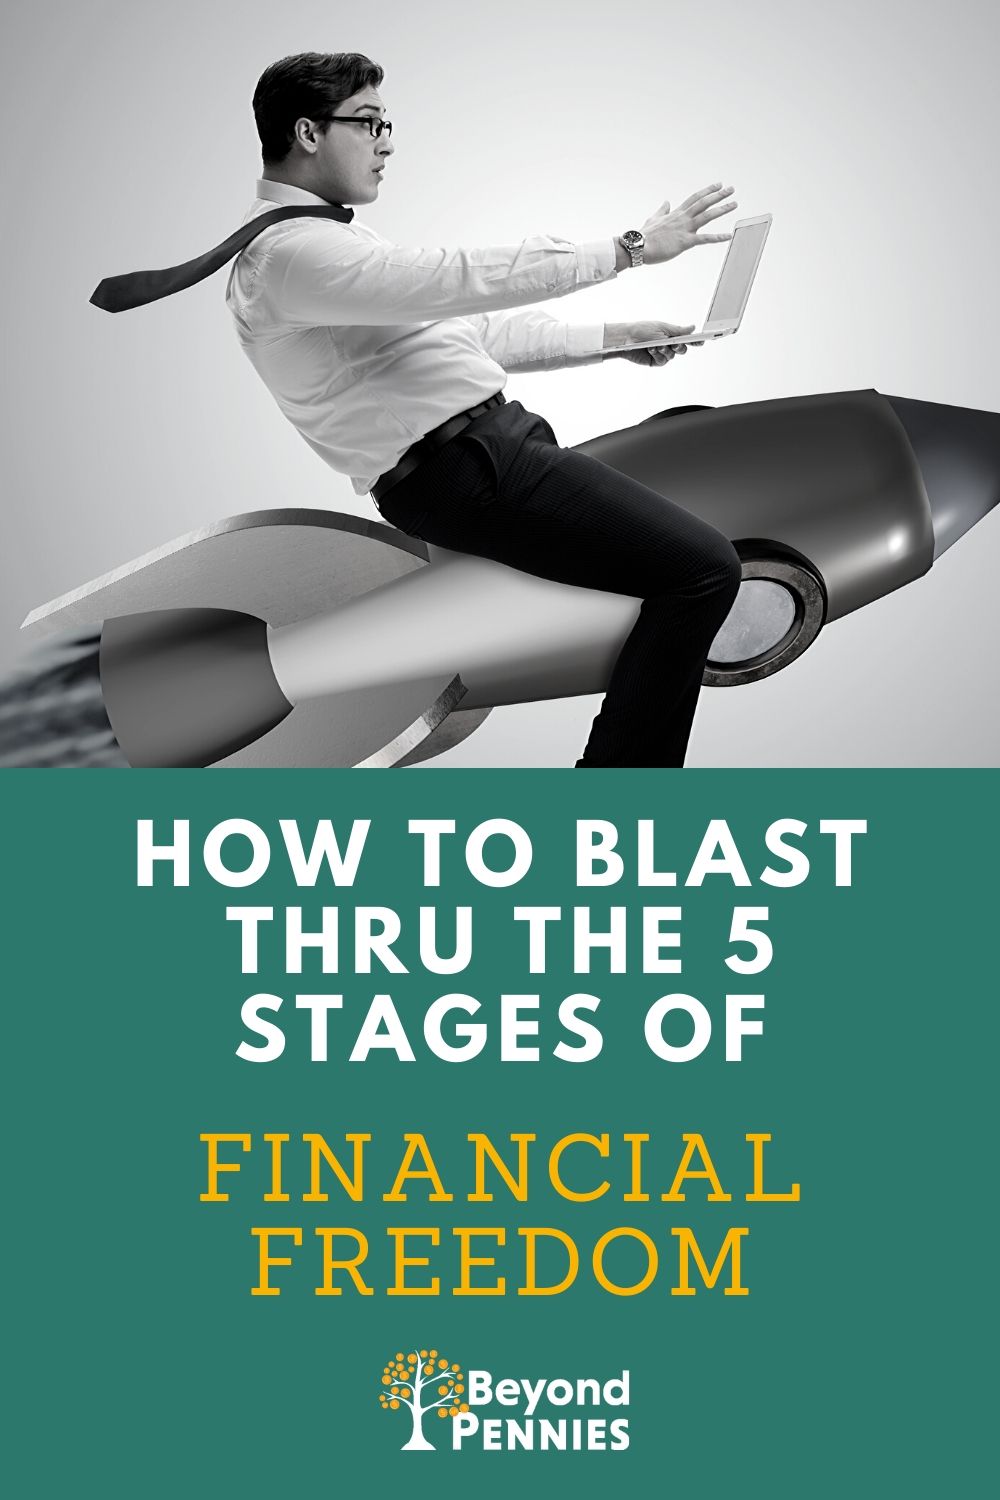 How to Blast Through the 5 Stages of Financial Freedom